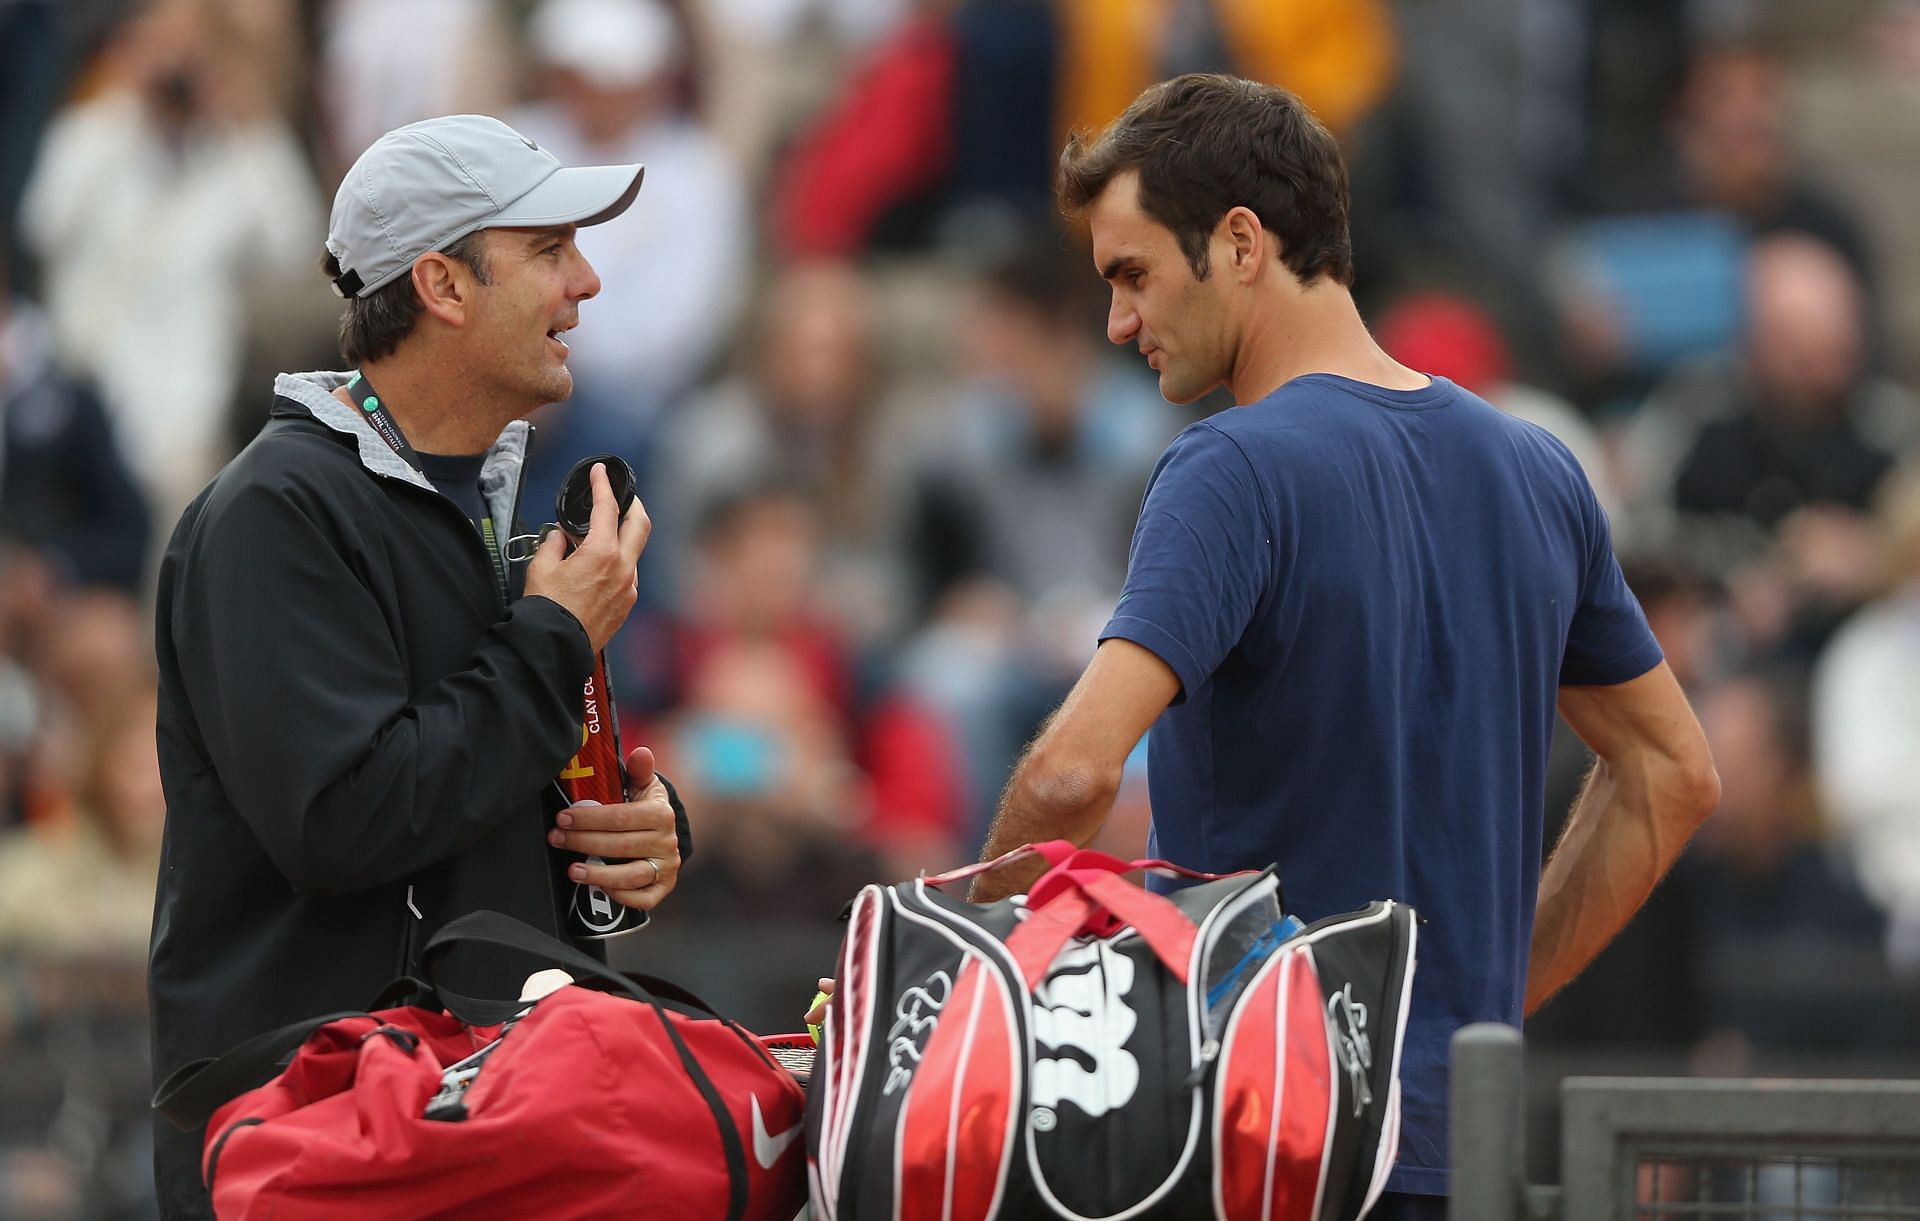 Paul Annacone with Roger Federer during the 2013 Italian Open